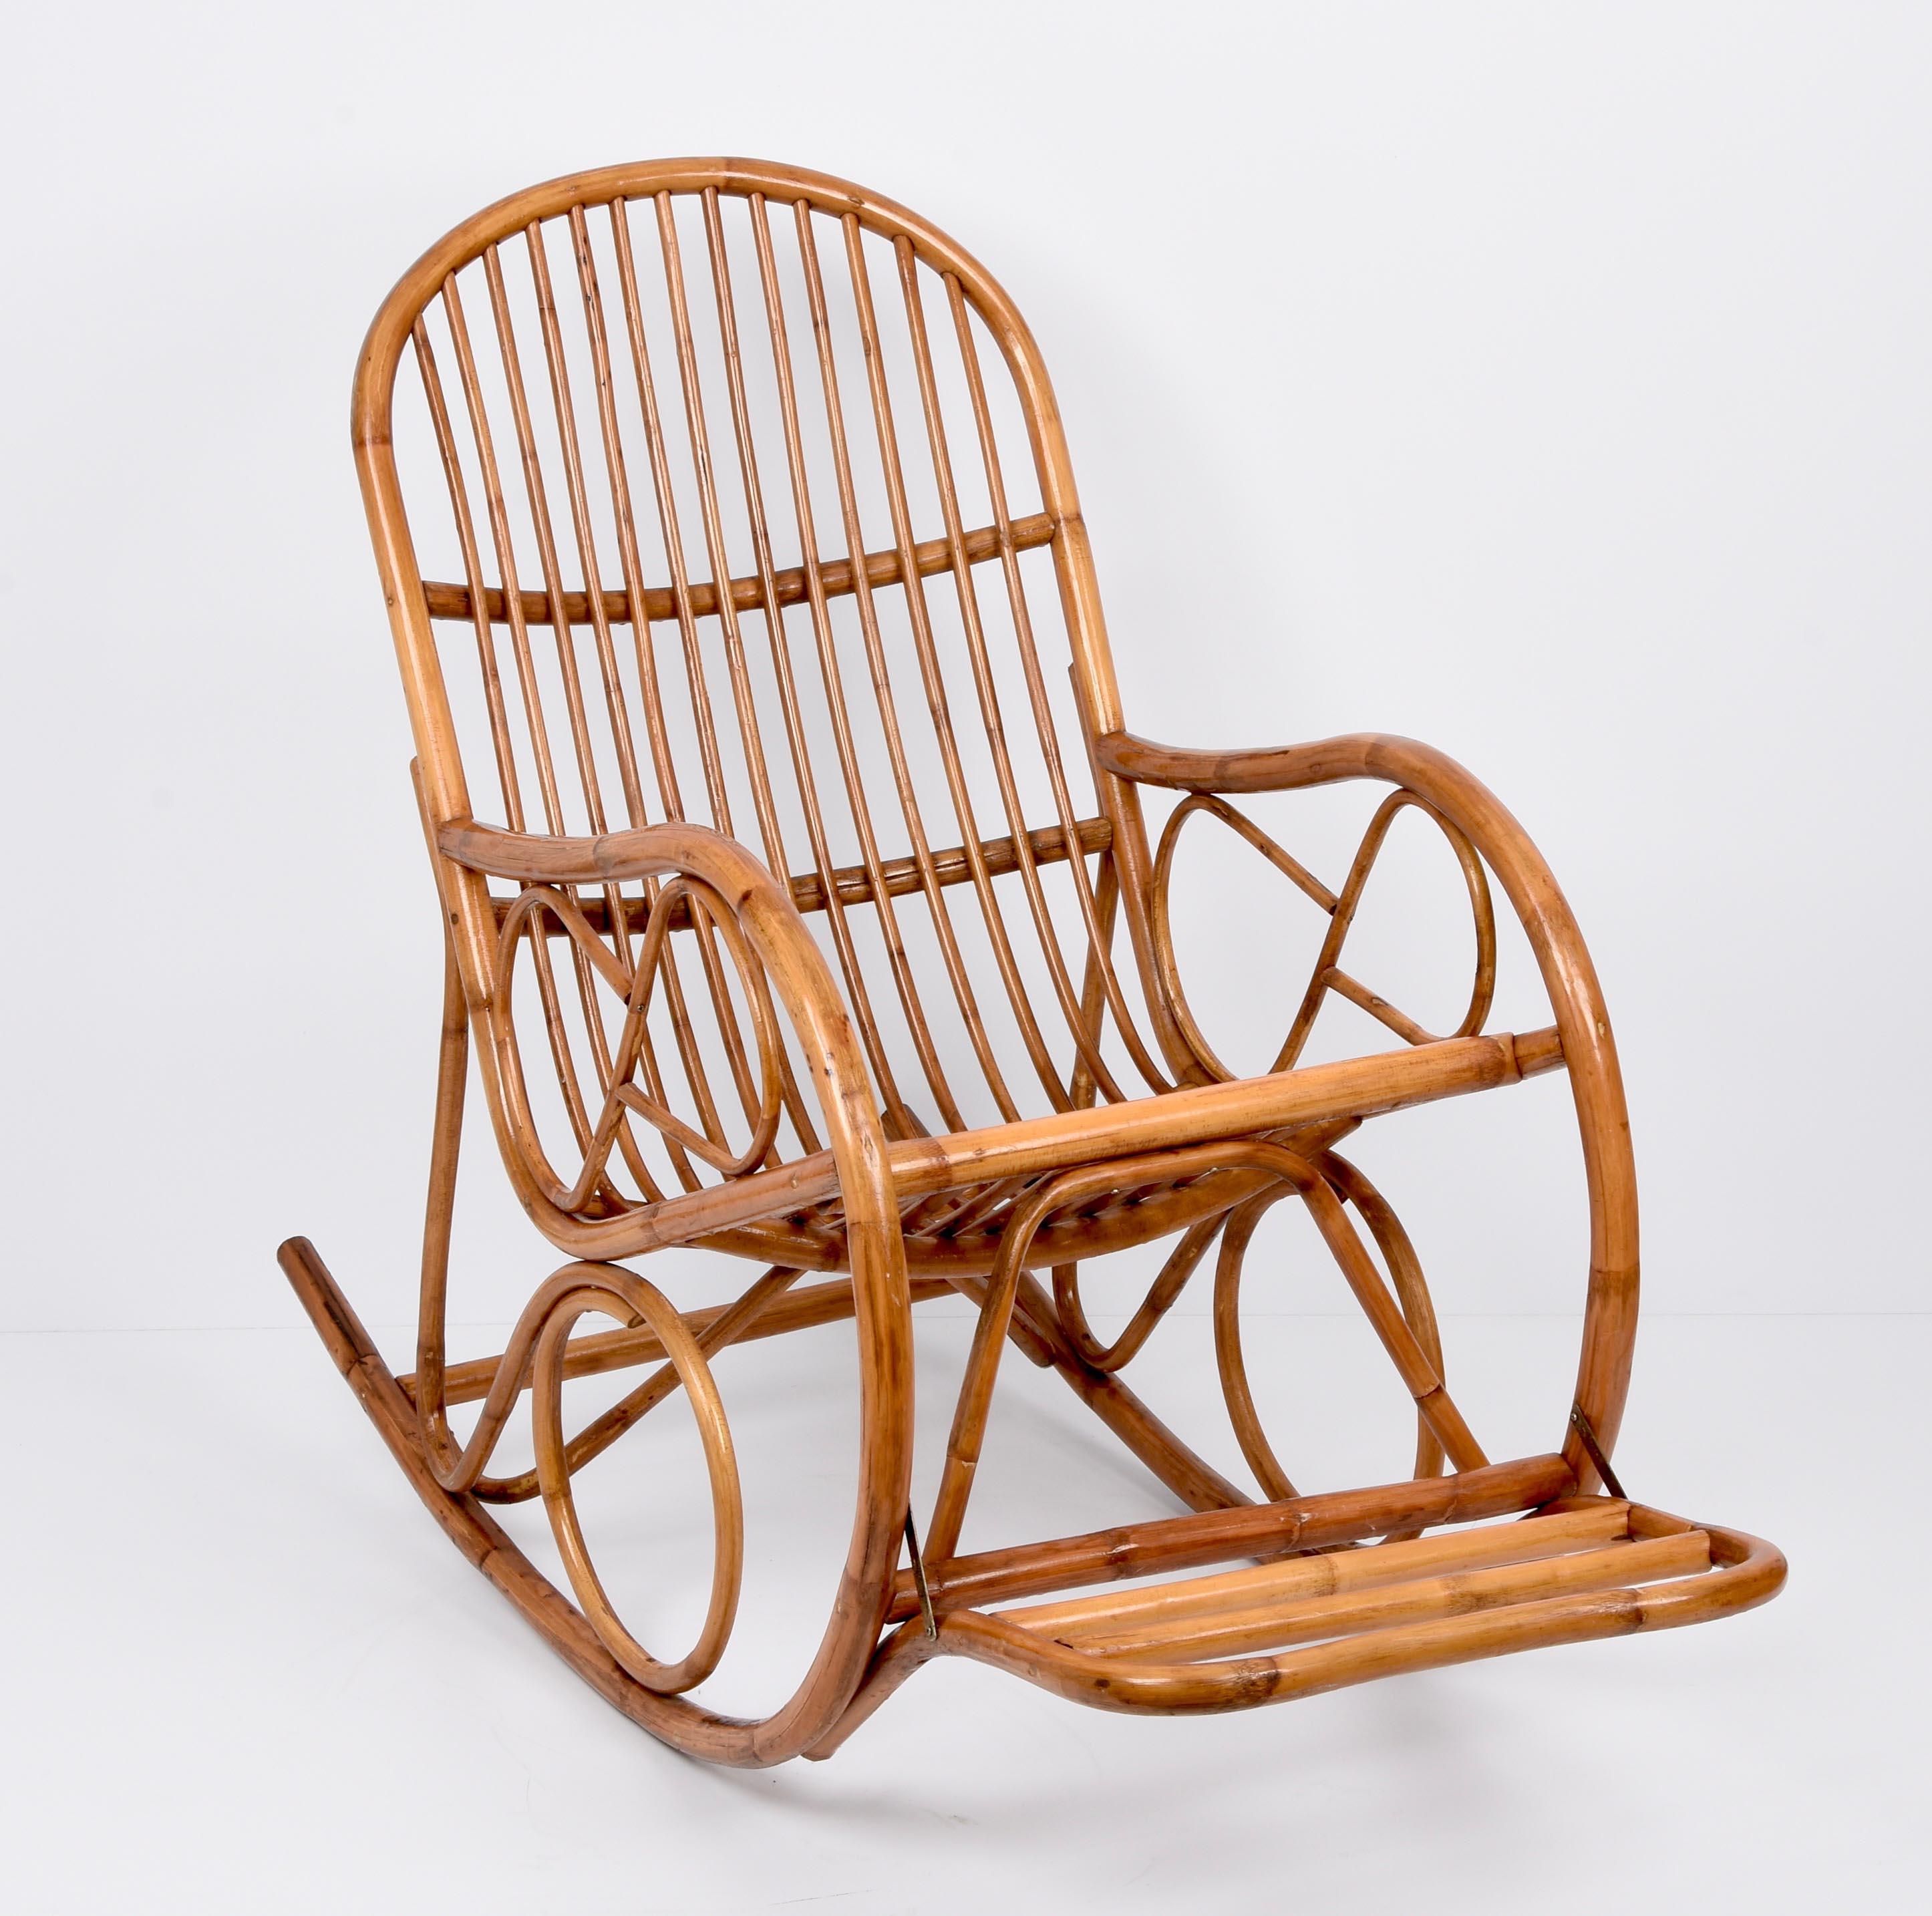 20th Century Midcentury French Riviera Rattan and Bamboo Italian Rocking Chair, 1970s For Sale